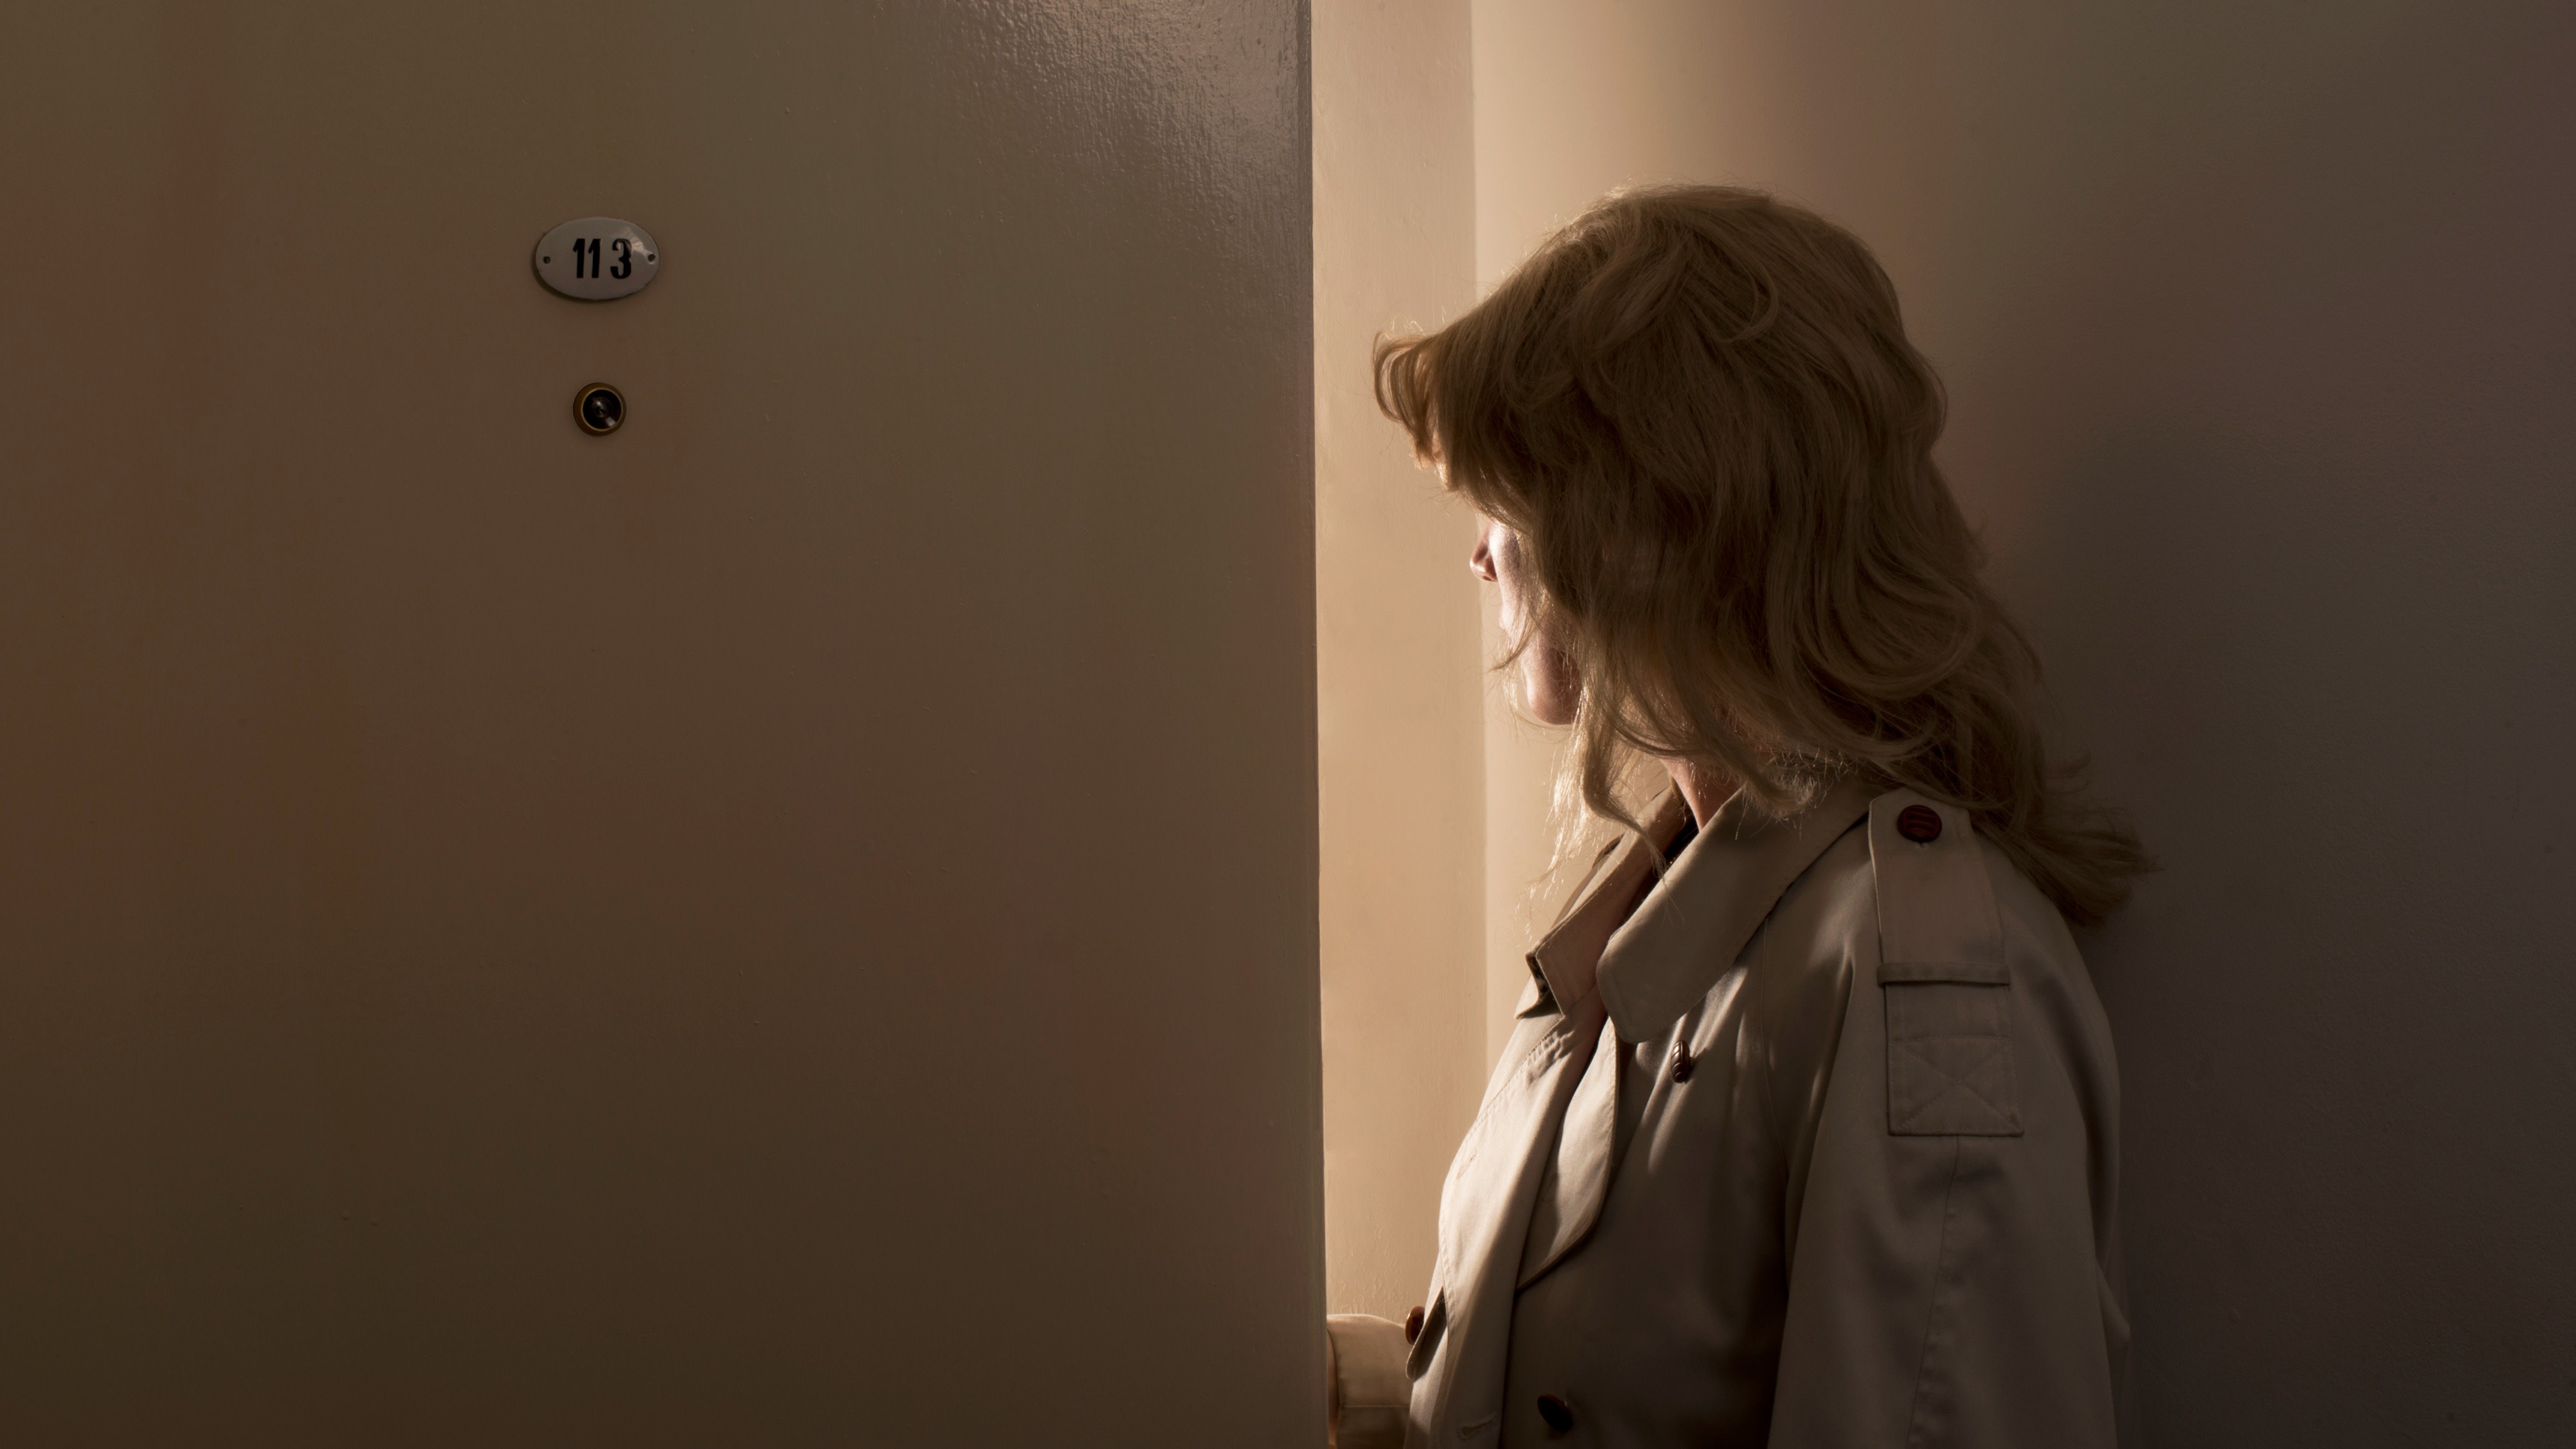 A woman in a trench coat looks behind a door